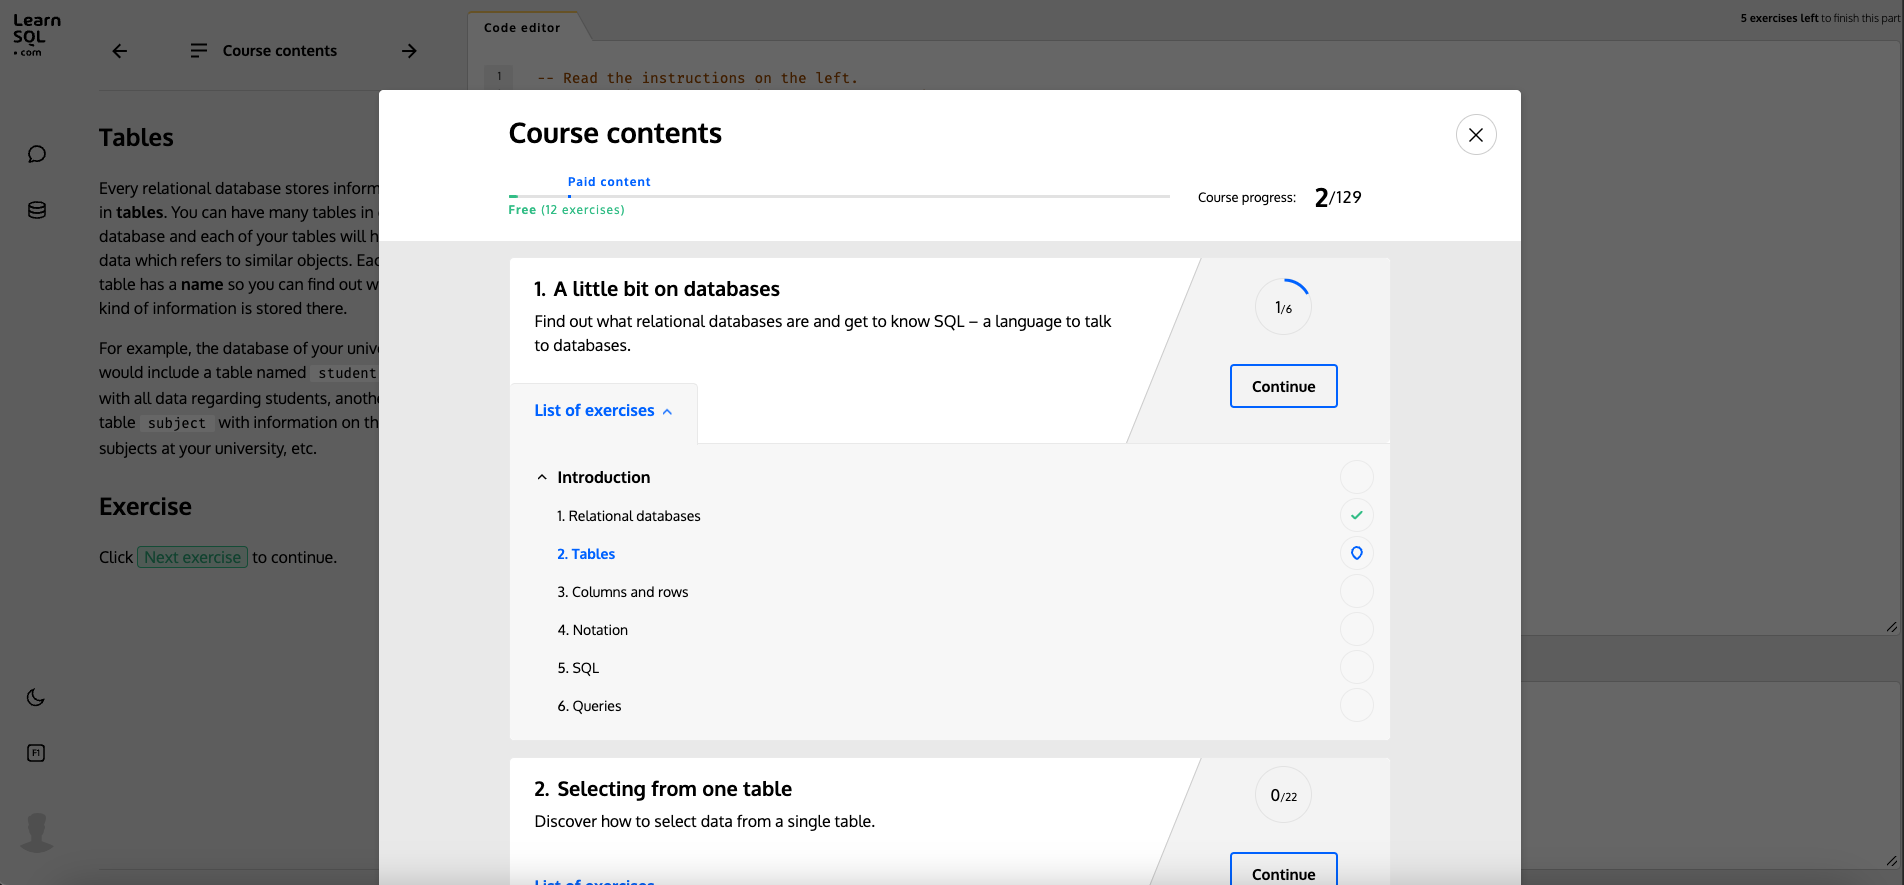 Learn SQL for Data Analysis With LearnSQL.com.br